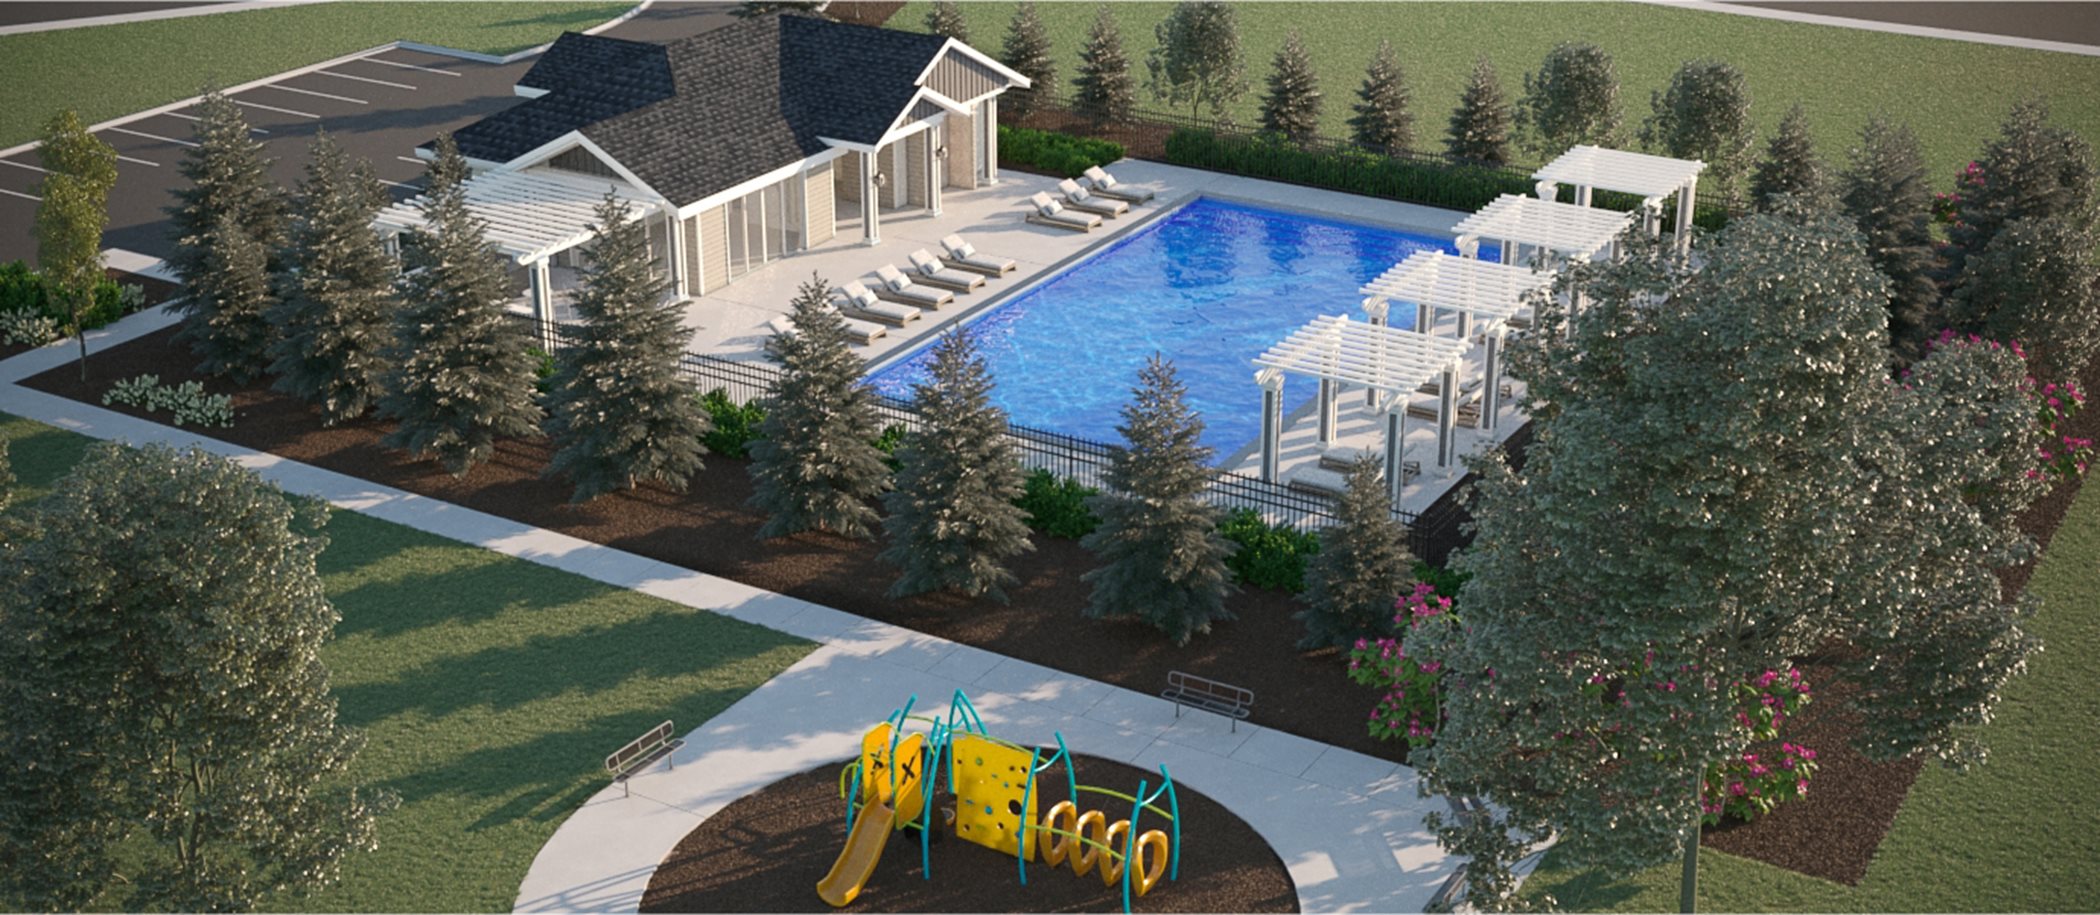 Mandalay Ranch rendering of pool and playground